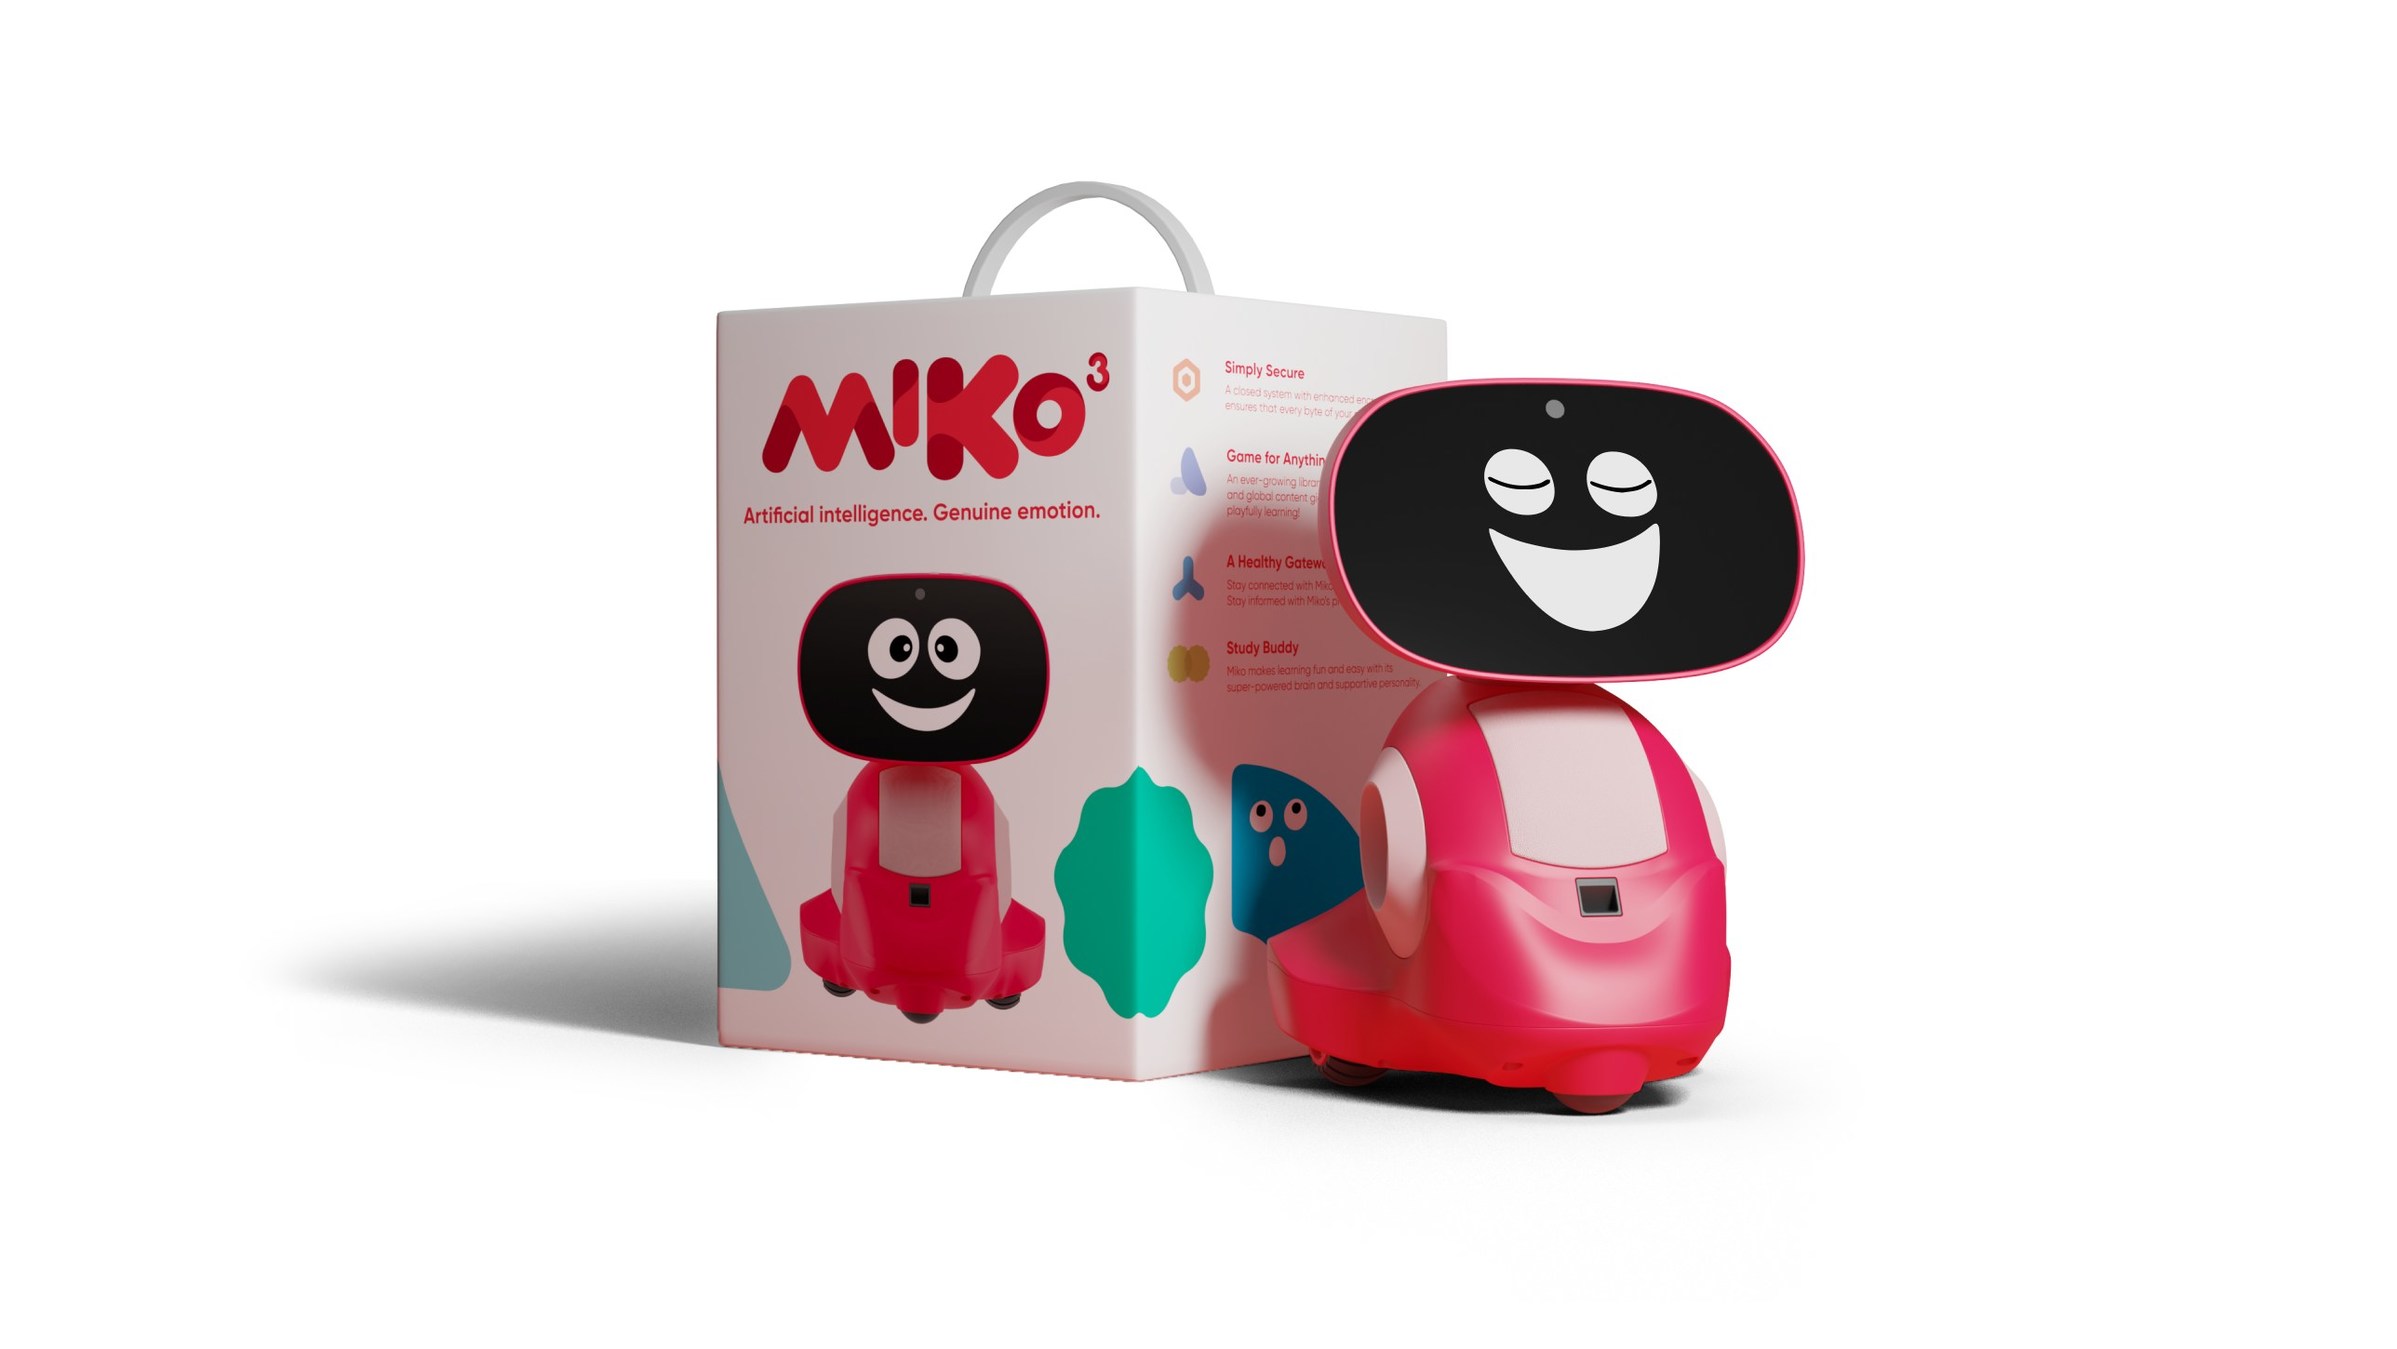 MIKO 2 COMPANION ROBOT FOR PLAYFUL LEARNING USED - WORKS GREAT!